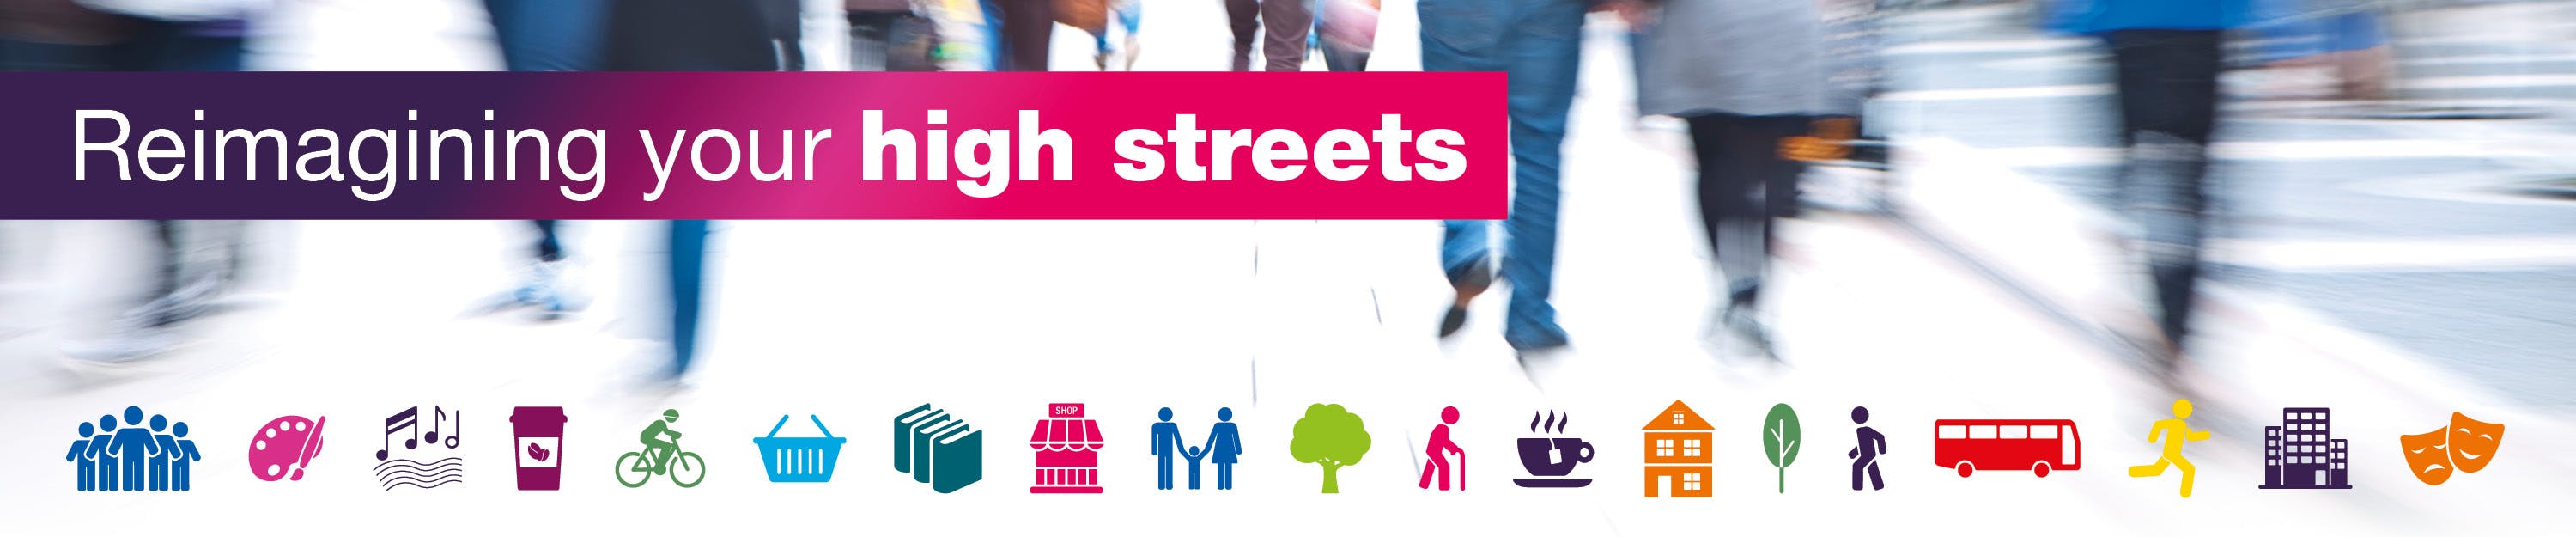 Reimagining your high streets